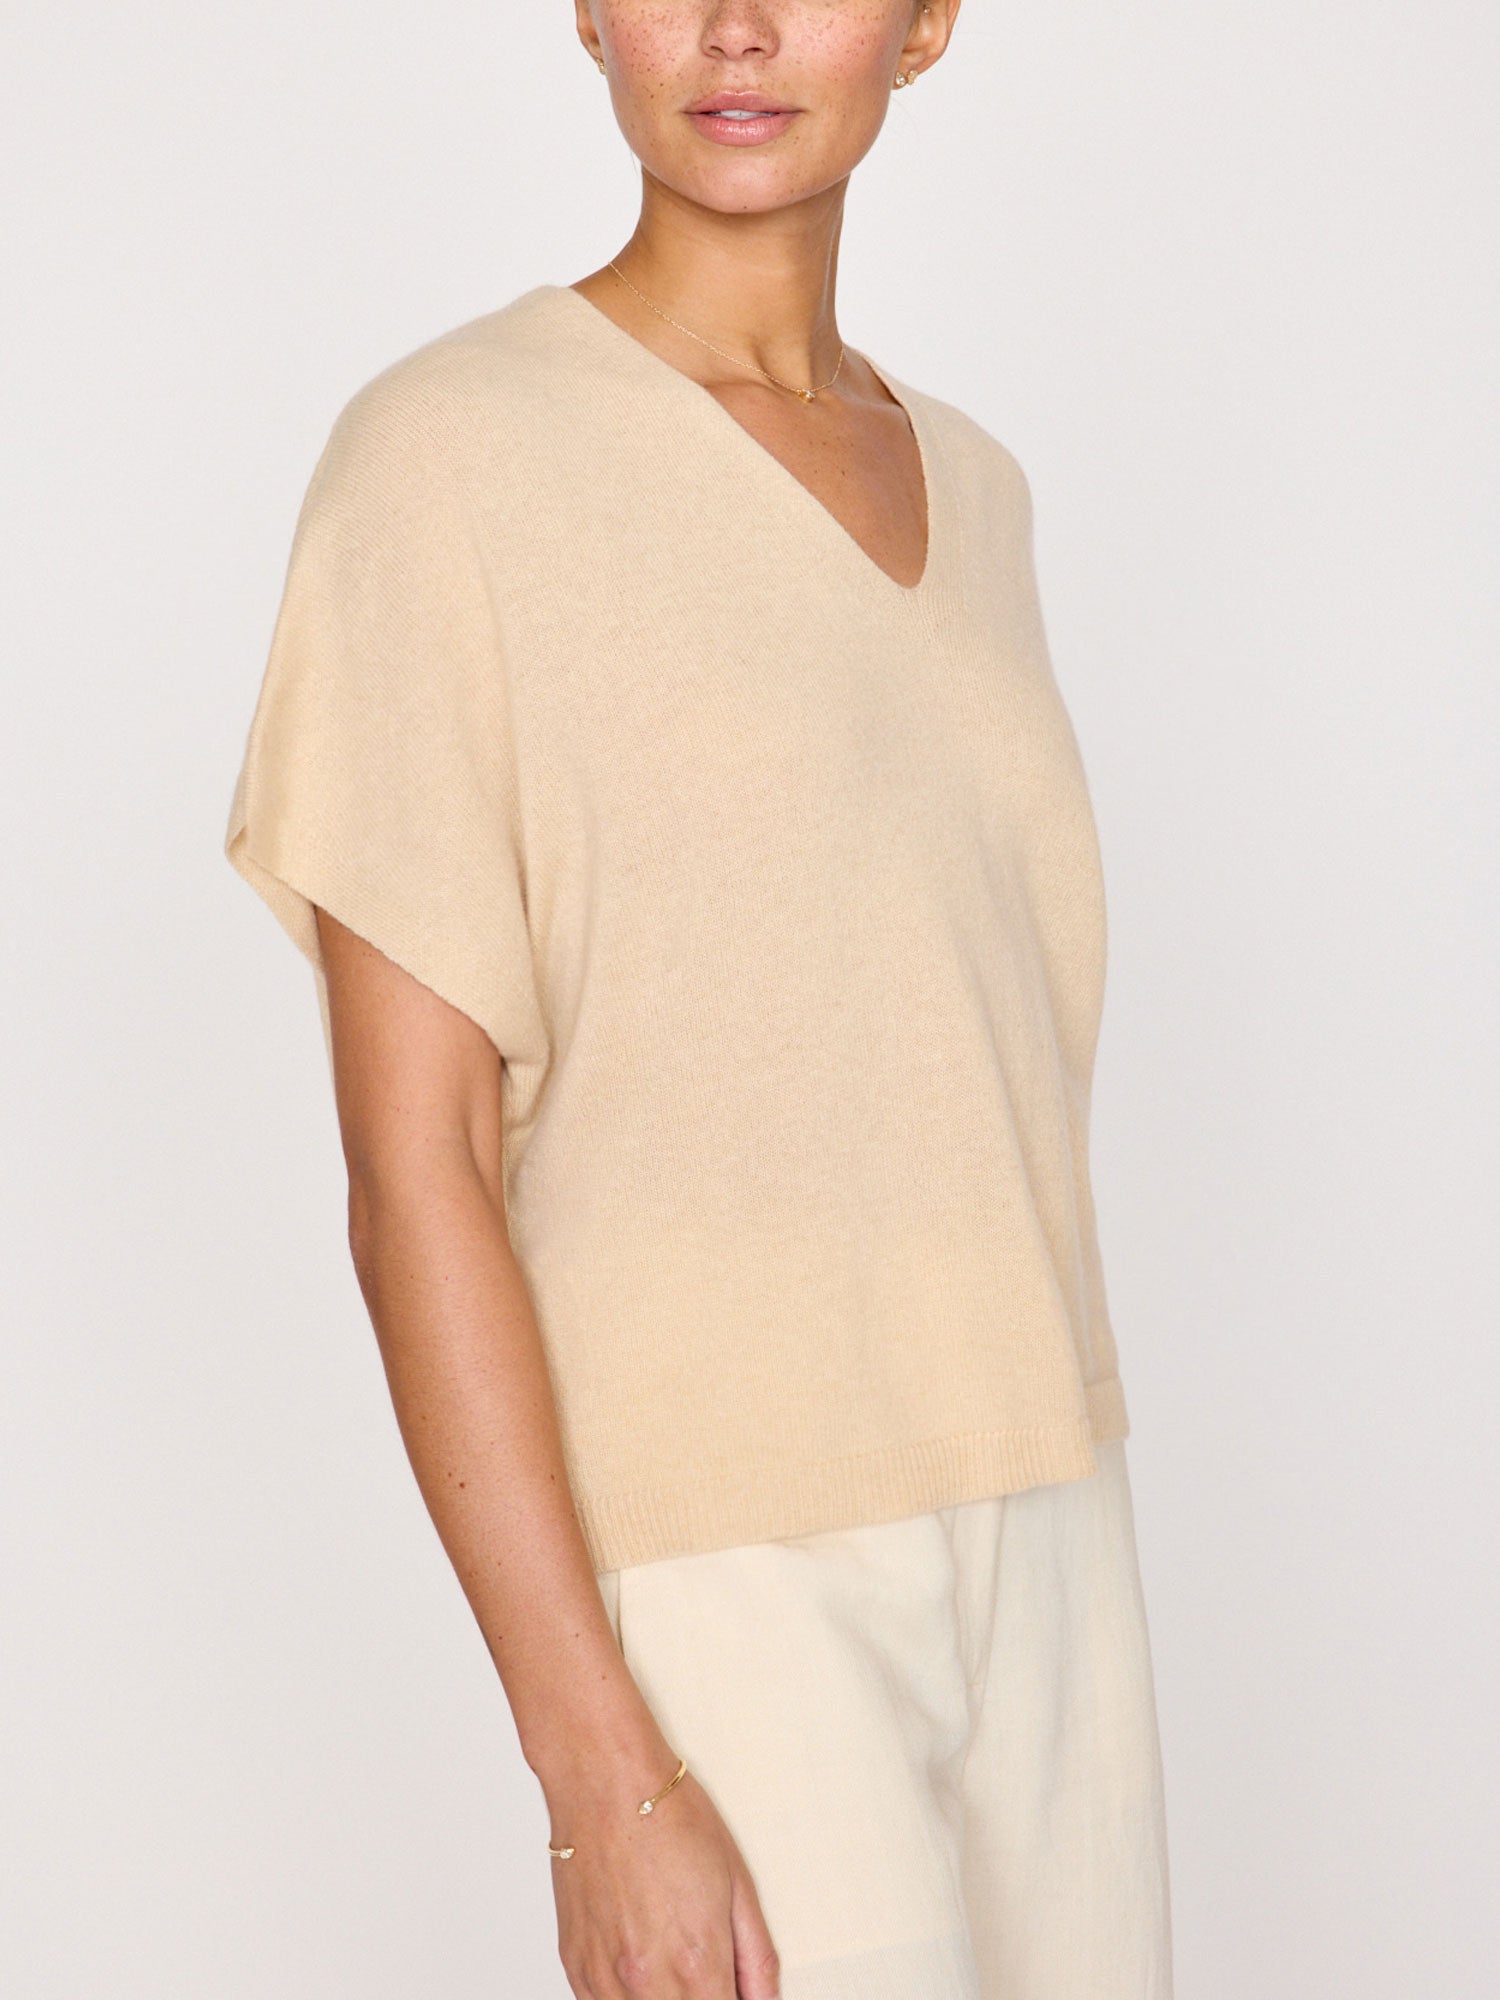 Ophi cashmere tan V-neck t-shirt top side view